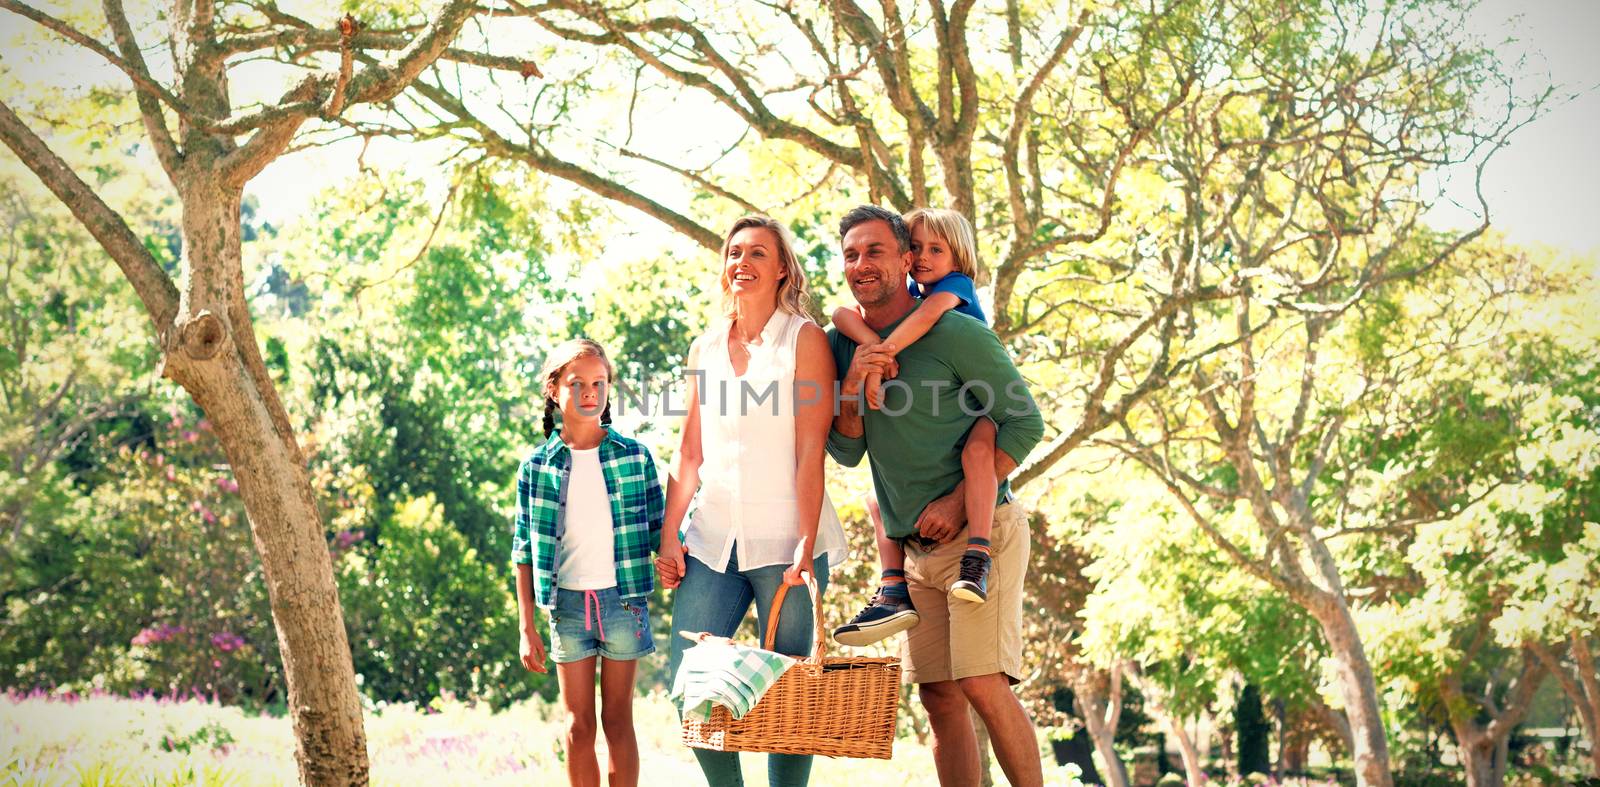 Family arriving in the park for picnic by Wavebreakmedia